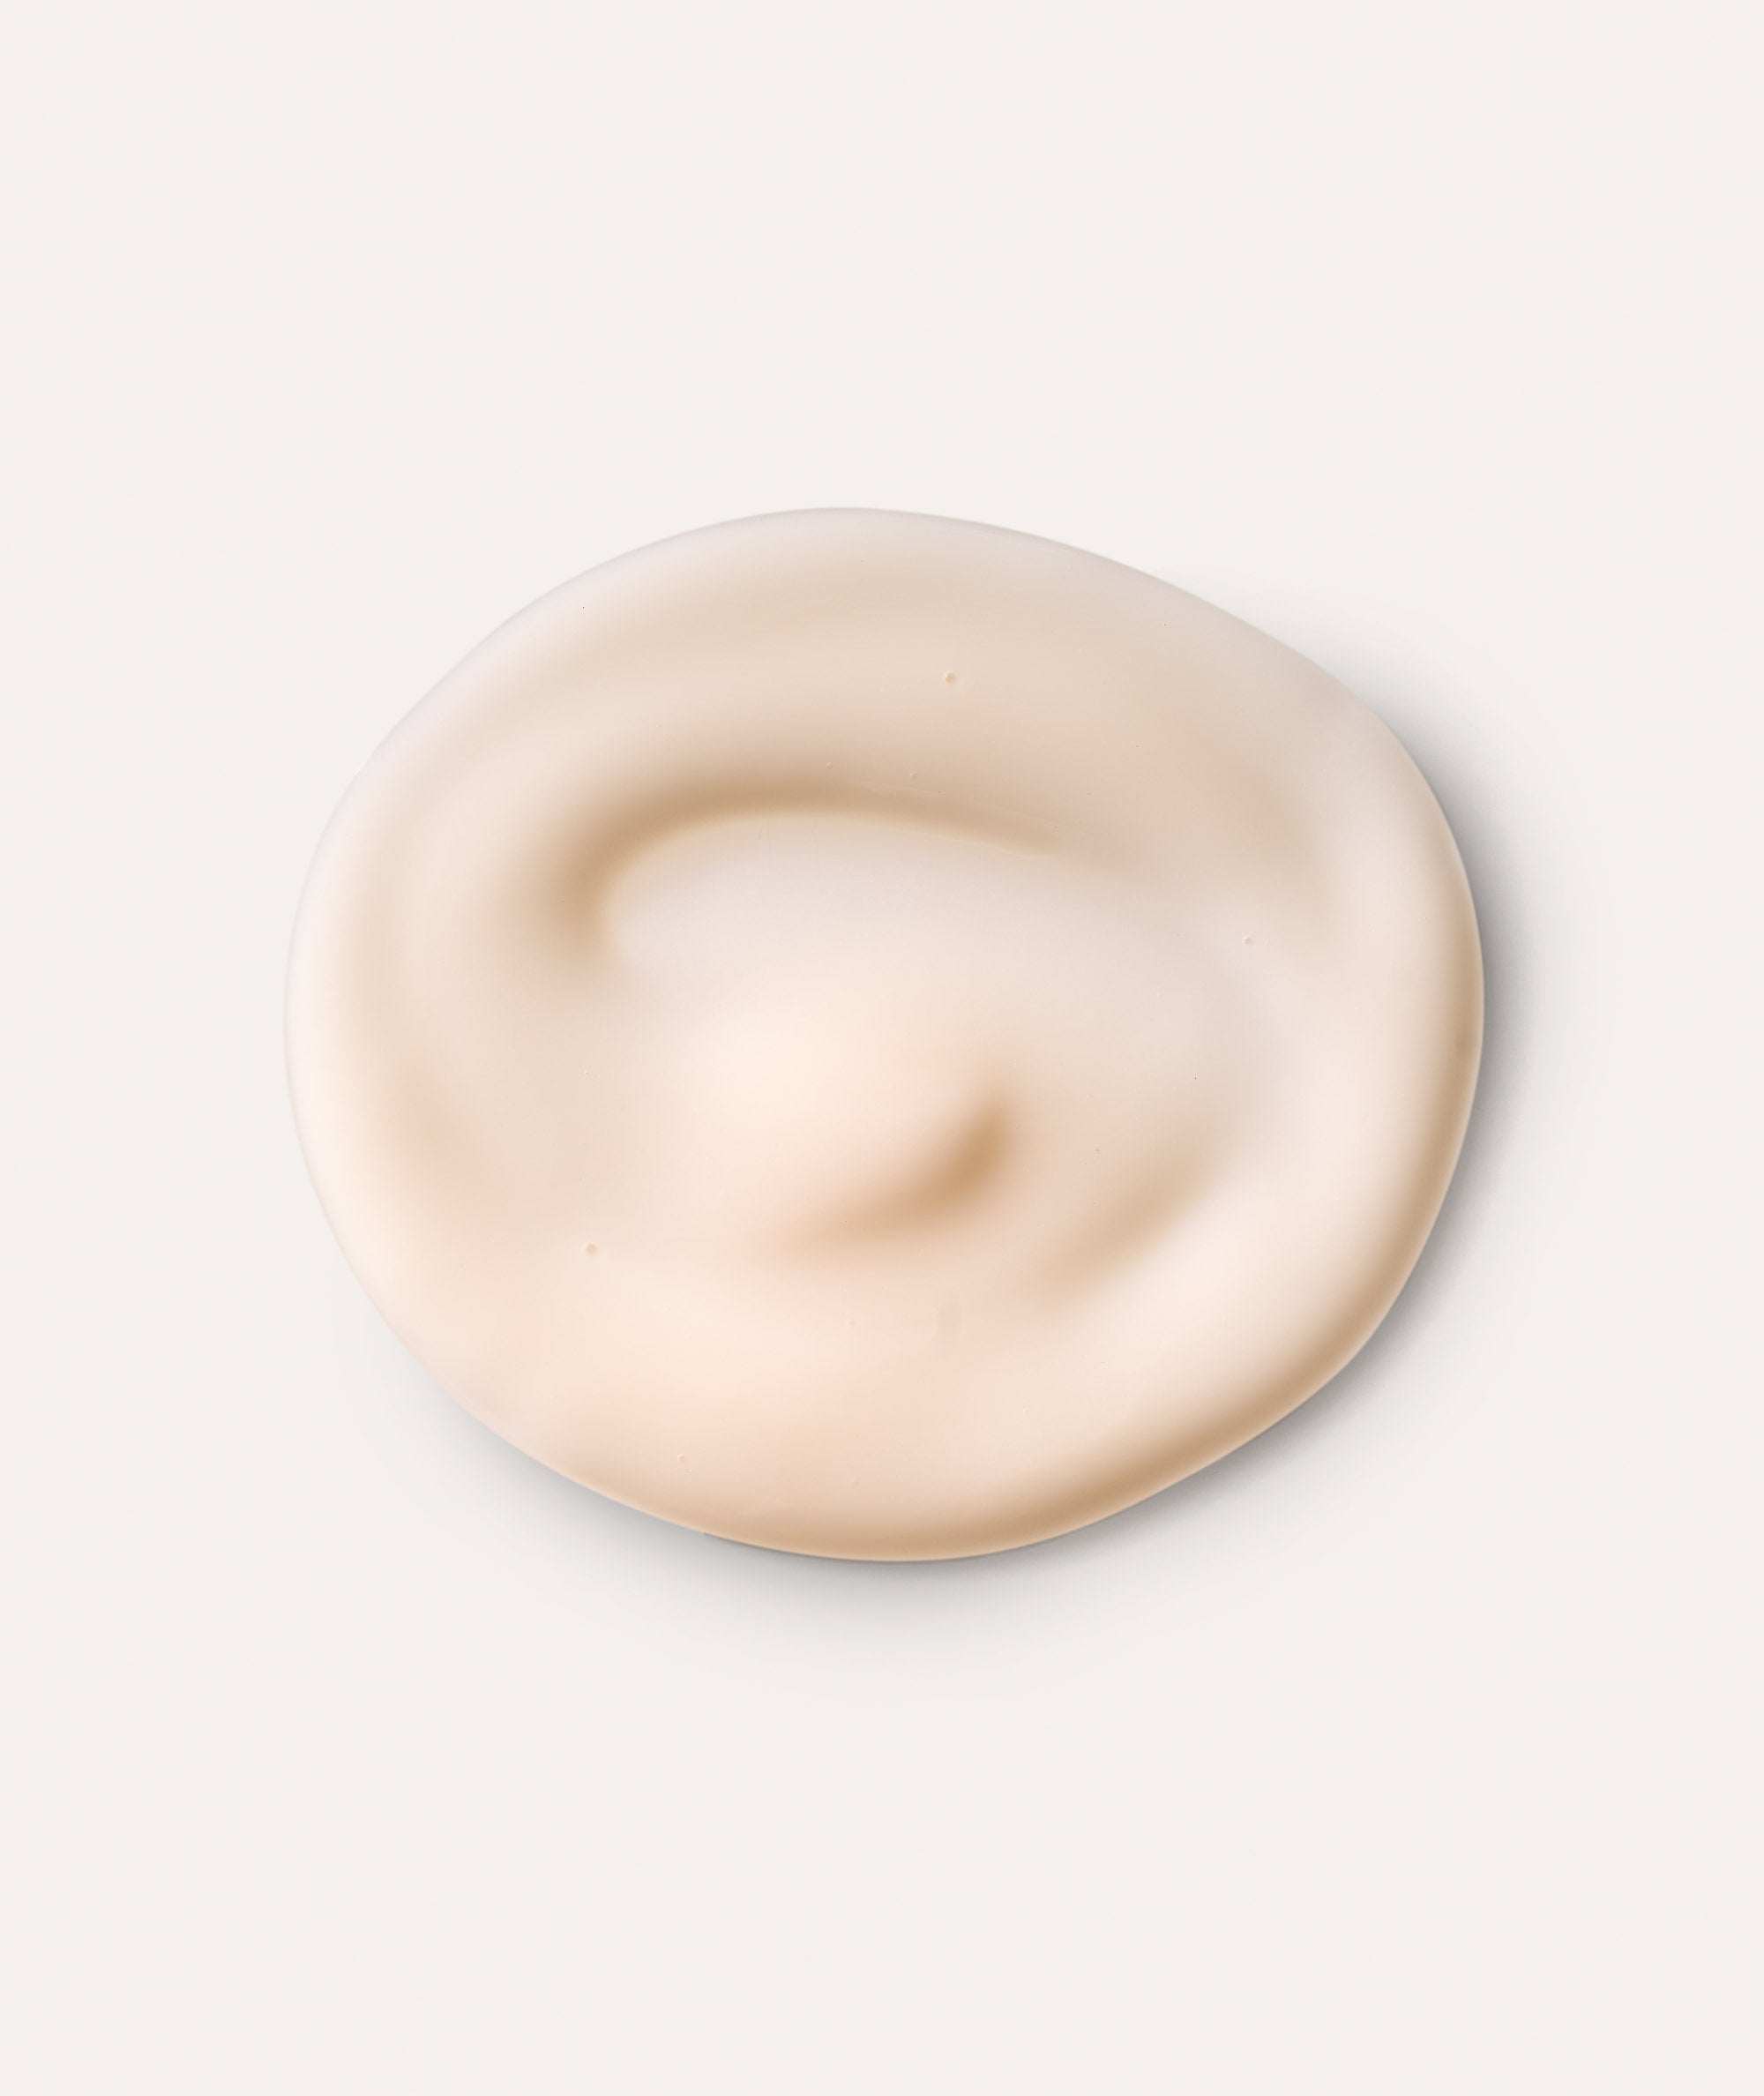 This is a picture of the Borghese Equilibrio Daily Moisturizer swatch